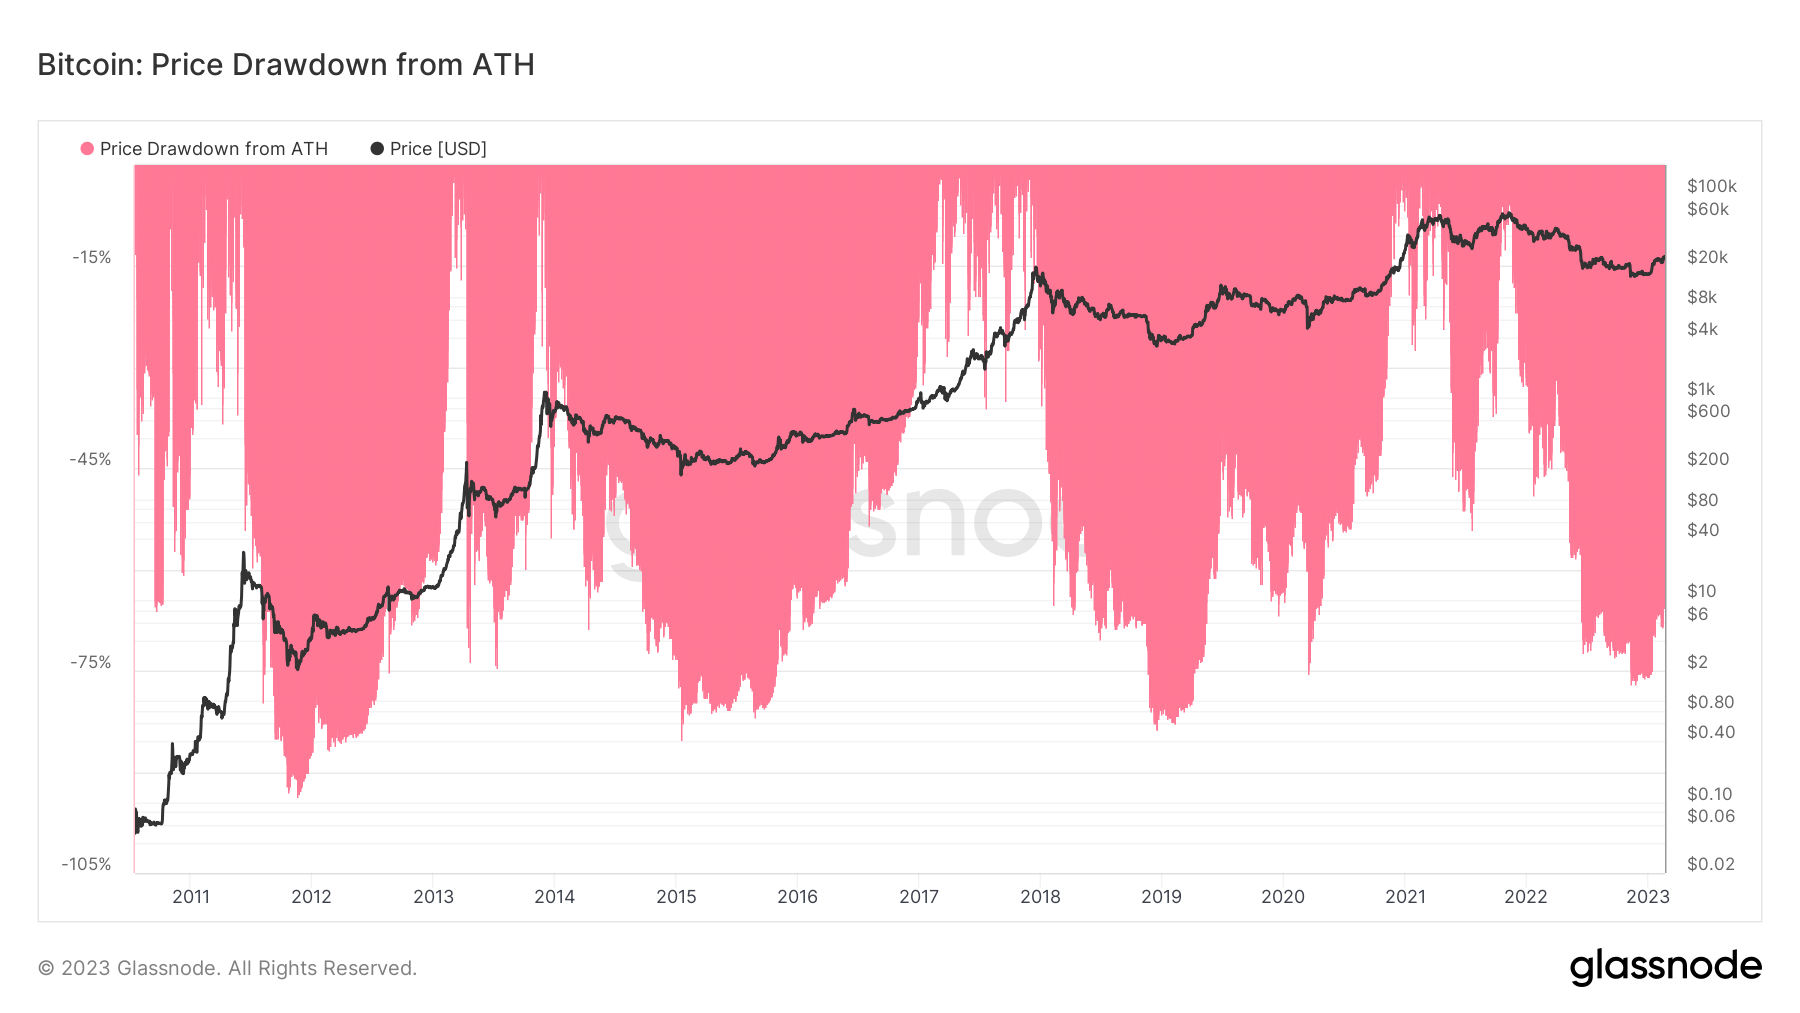 Price drawdown from ATH: (Source: Glassnode)